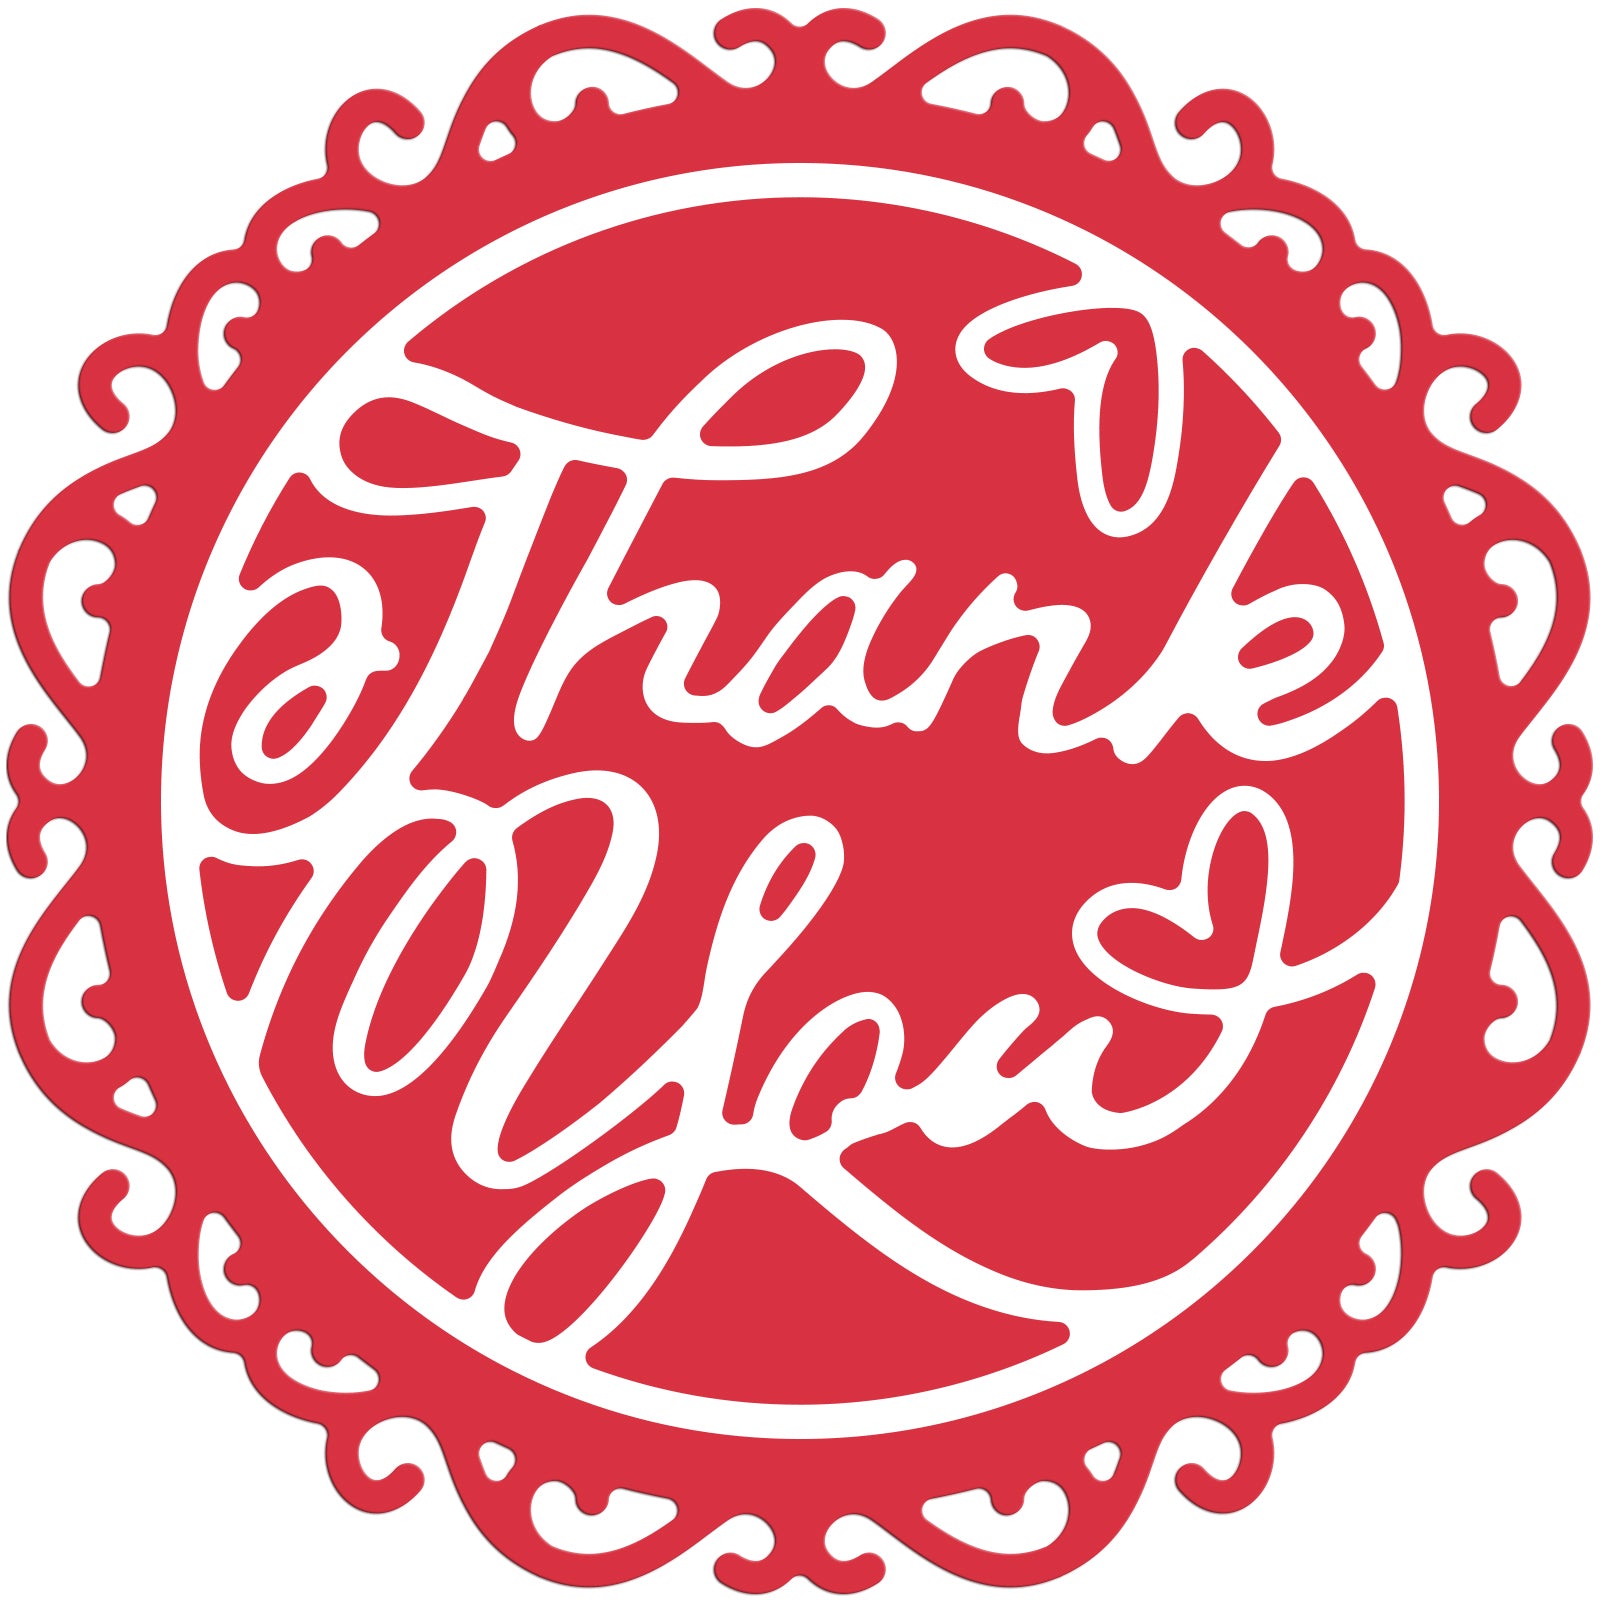 Thank You, Word Art, Circle, Lace Carbon Steel Cutting Dies Stencils, for DIY Scrapbooking/Photo Album, Decorative Embossing DIY Paper Card